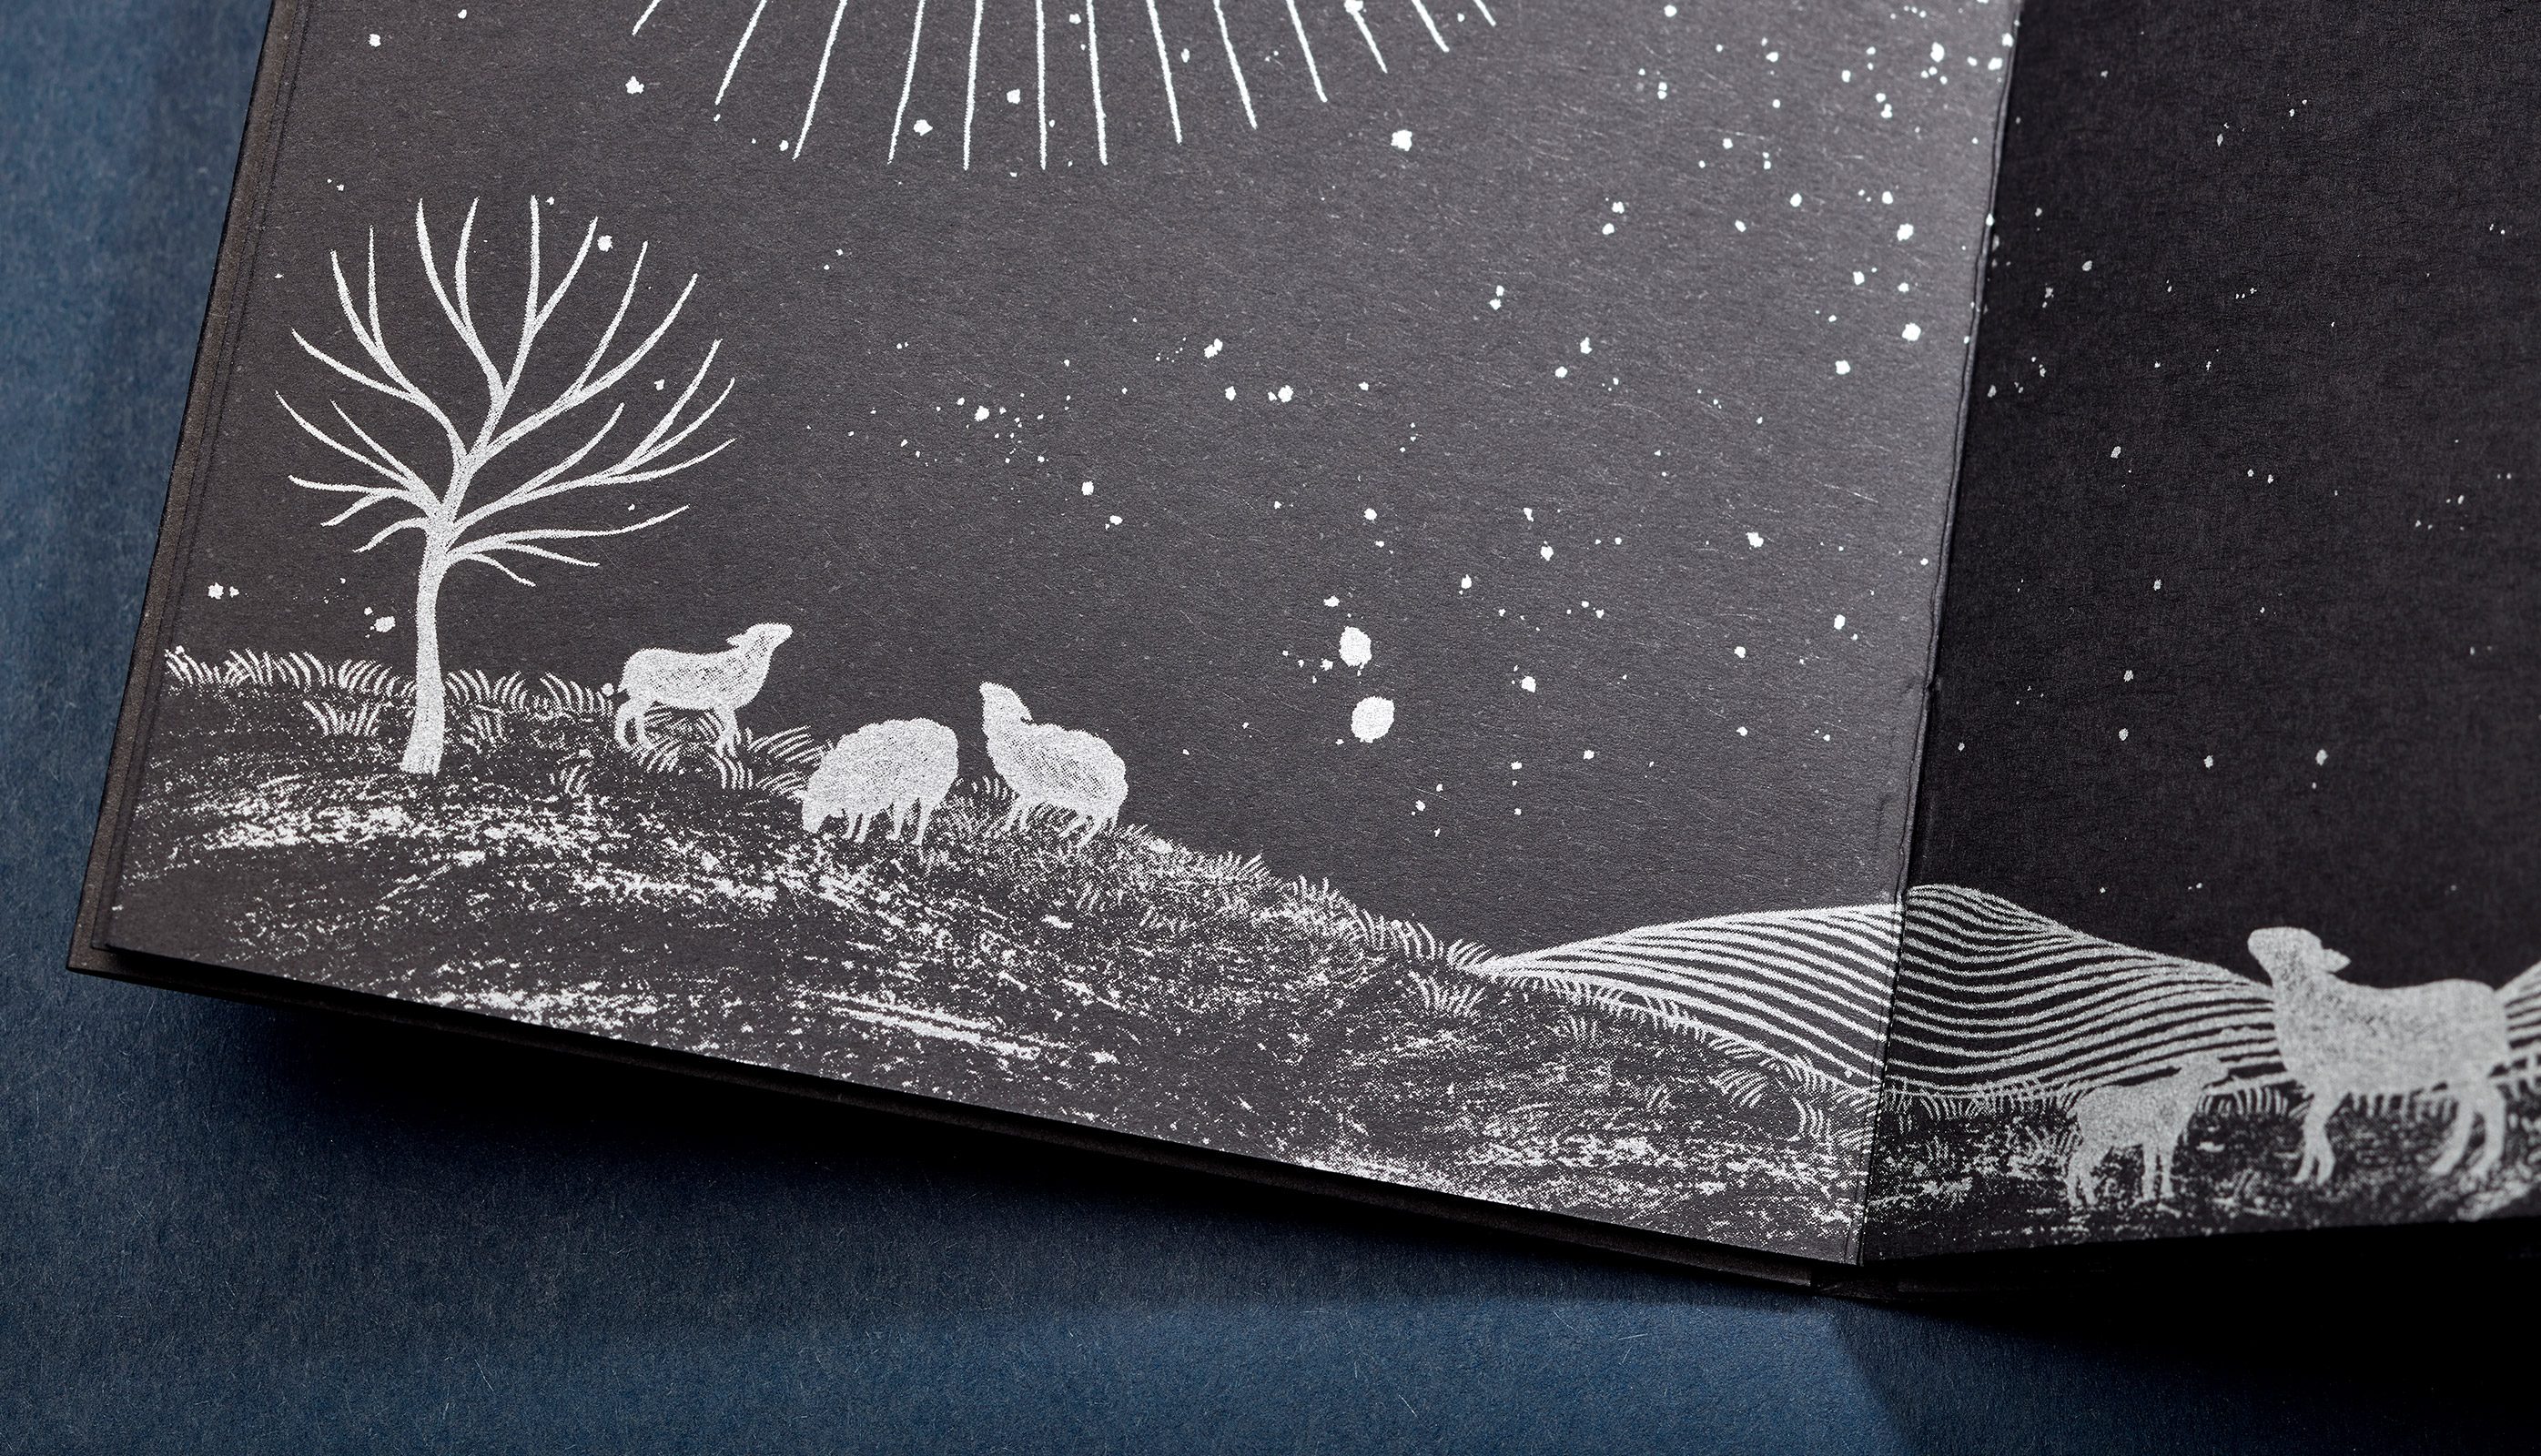 Close-up of poetry book page showing illustration of sheep on a cold, barren mountain